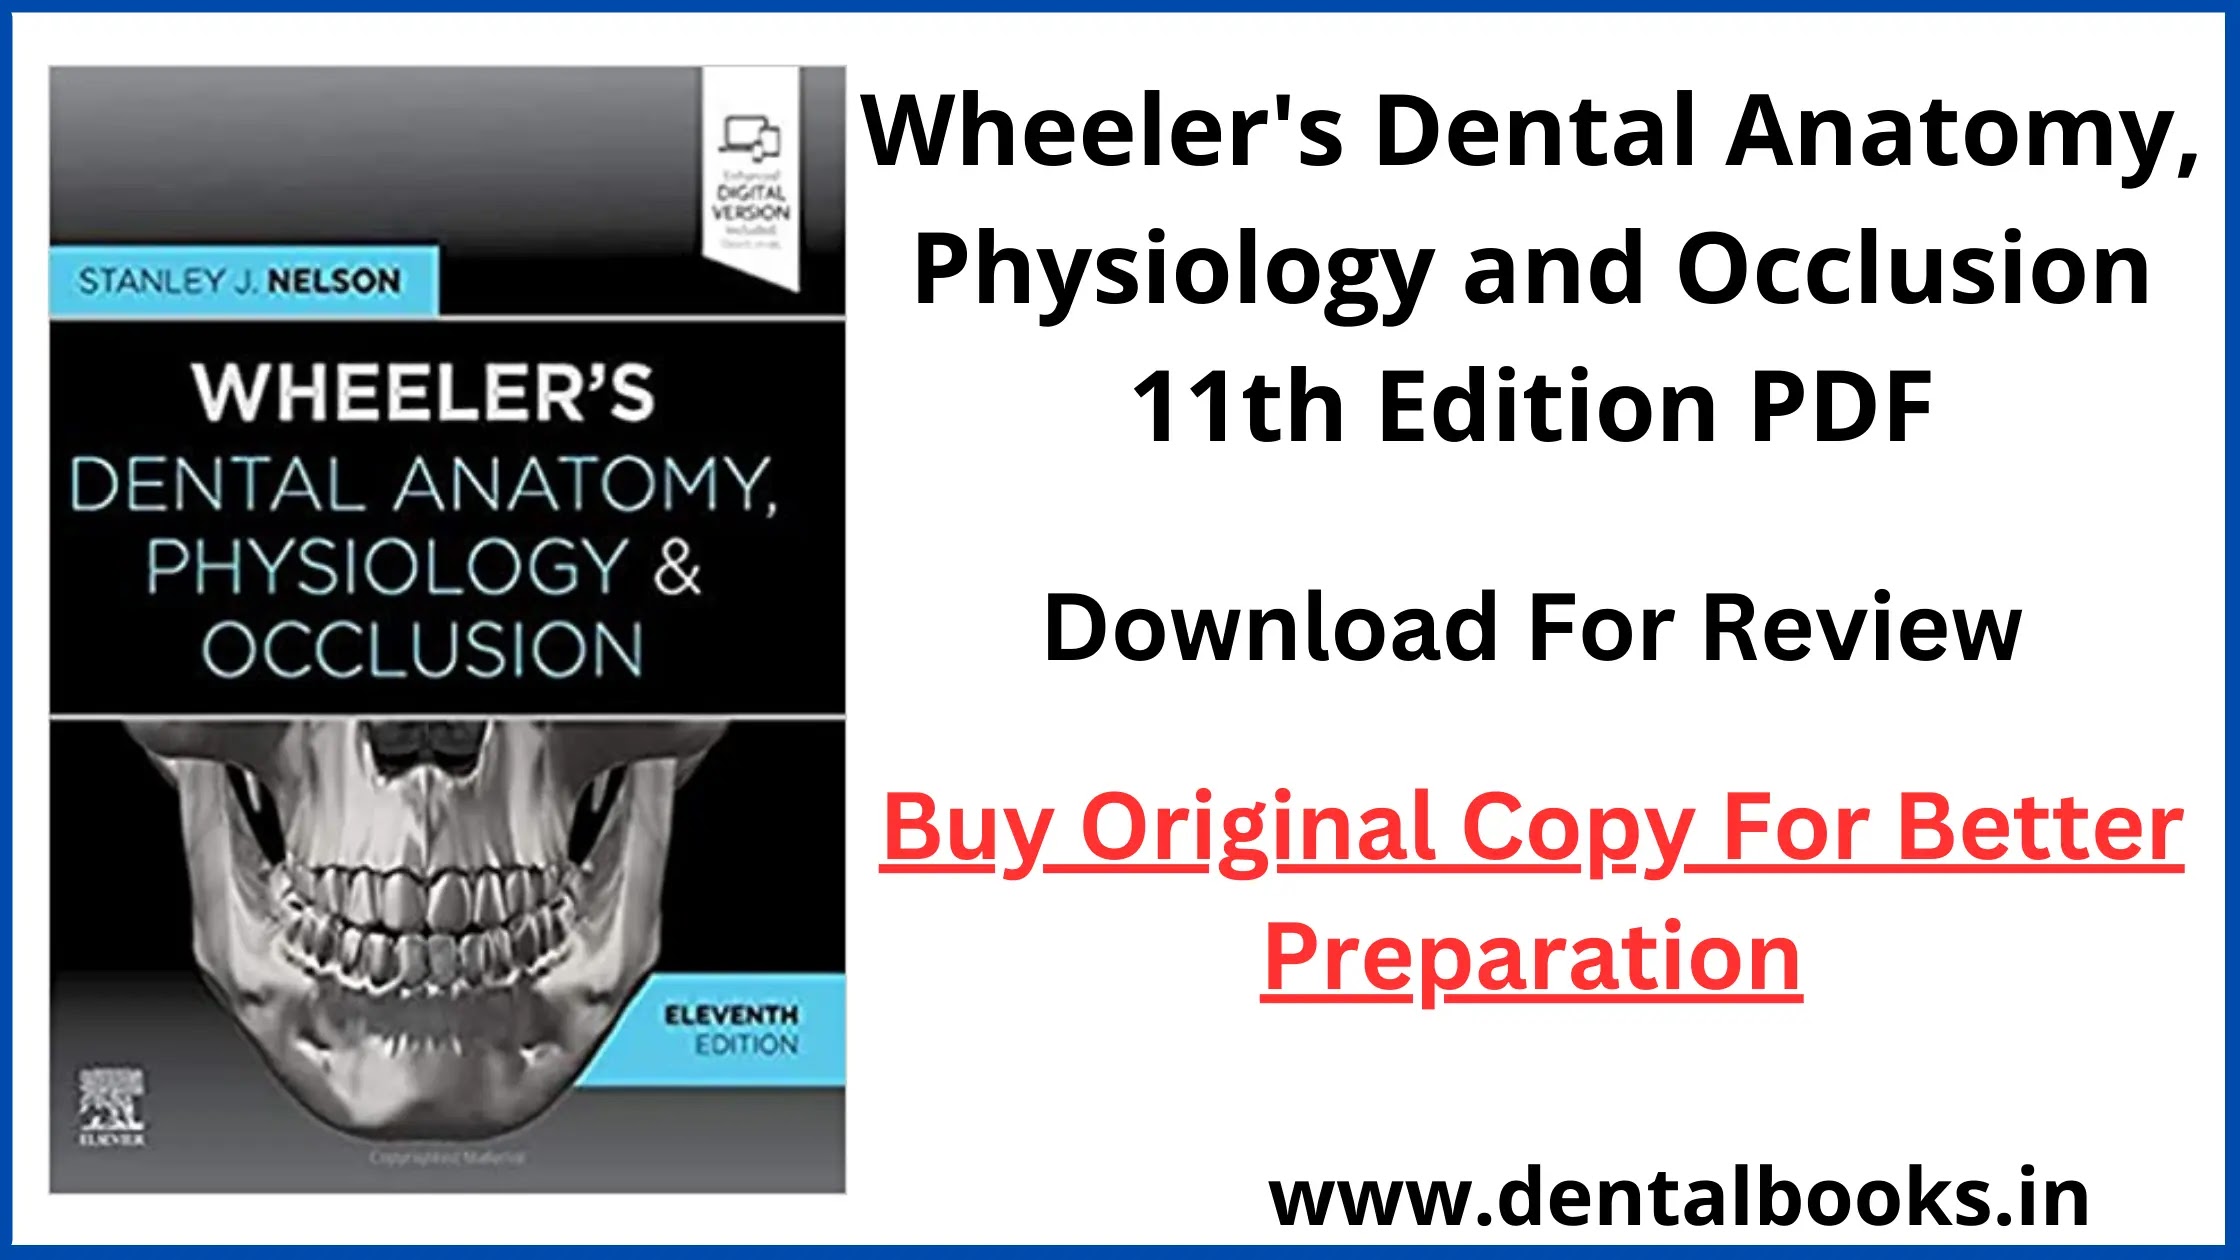 Wheeler's Dental Anatomy, Physiology and Occlusion 11th Edition PDF